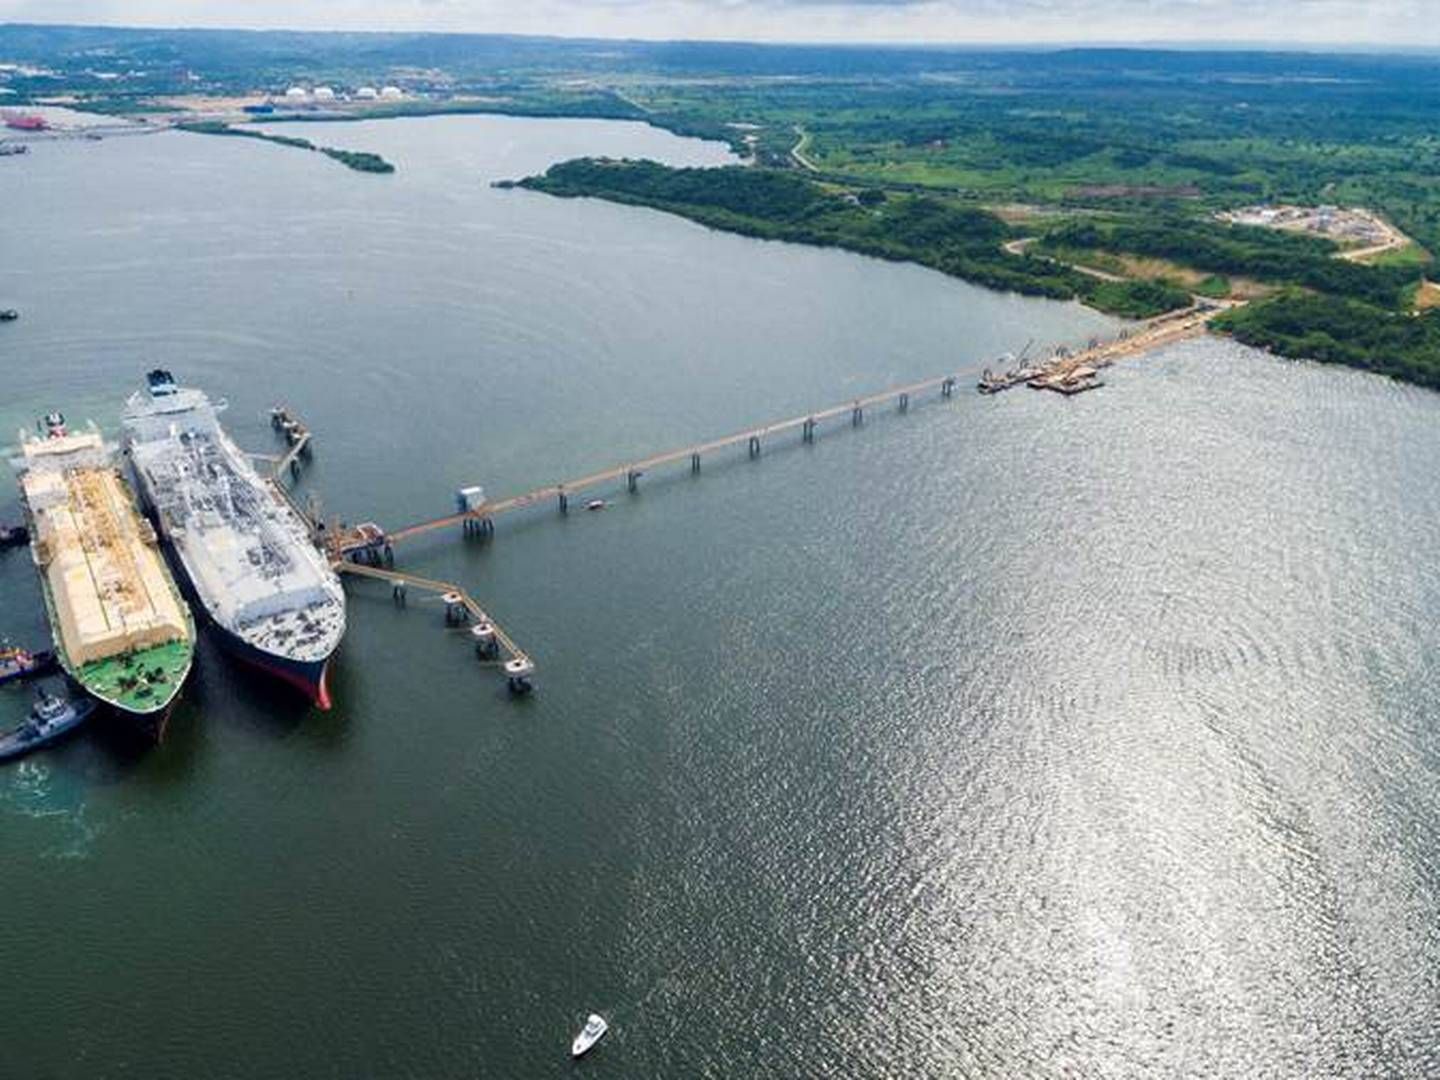 Höegh LNG has specialized in storing liquified natural gas at sea. | Photo: Höegh Lng